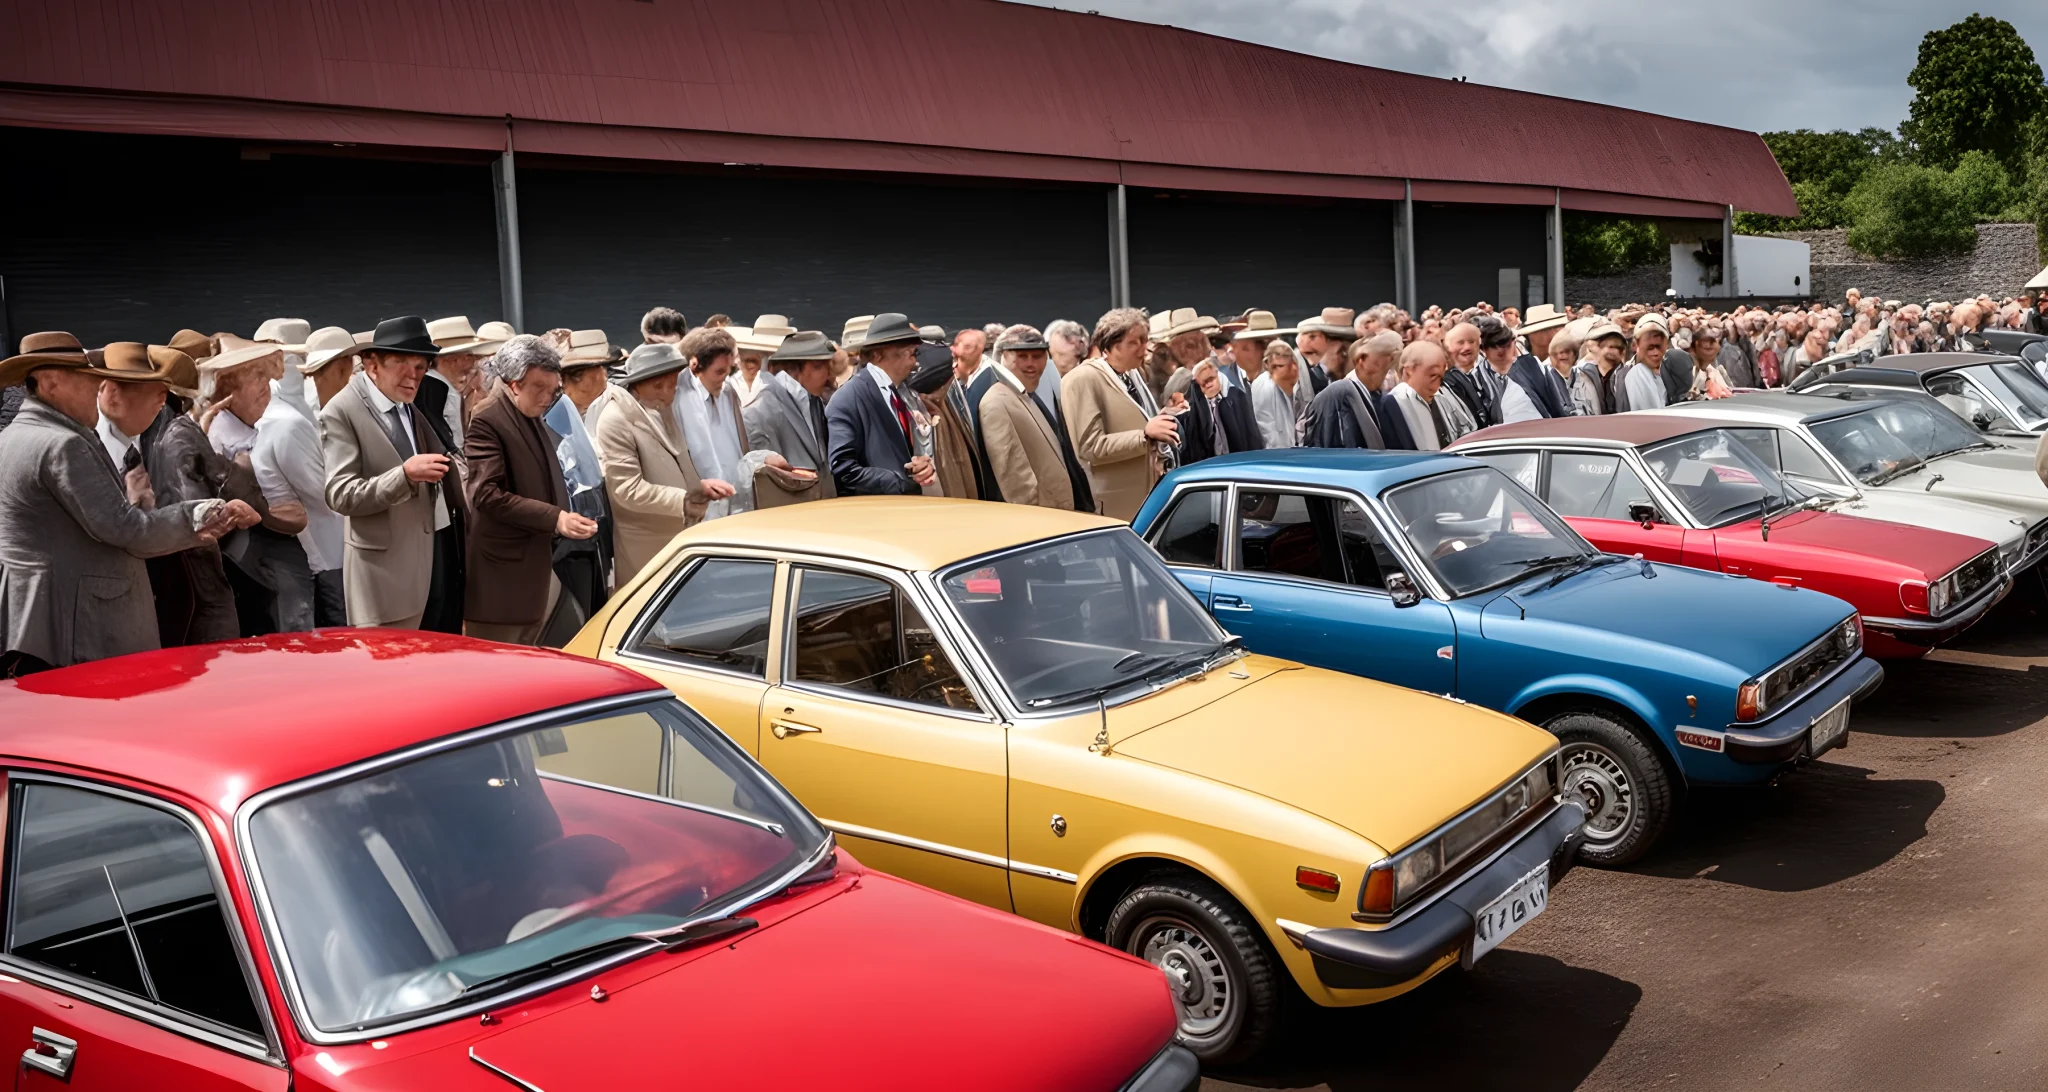 The image shows a lineup of vintage Mazda cars at an auction, with bidders and auctioneers in the background.